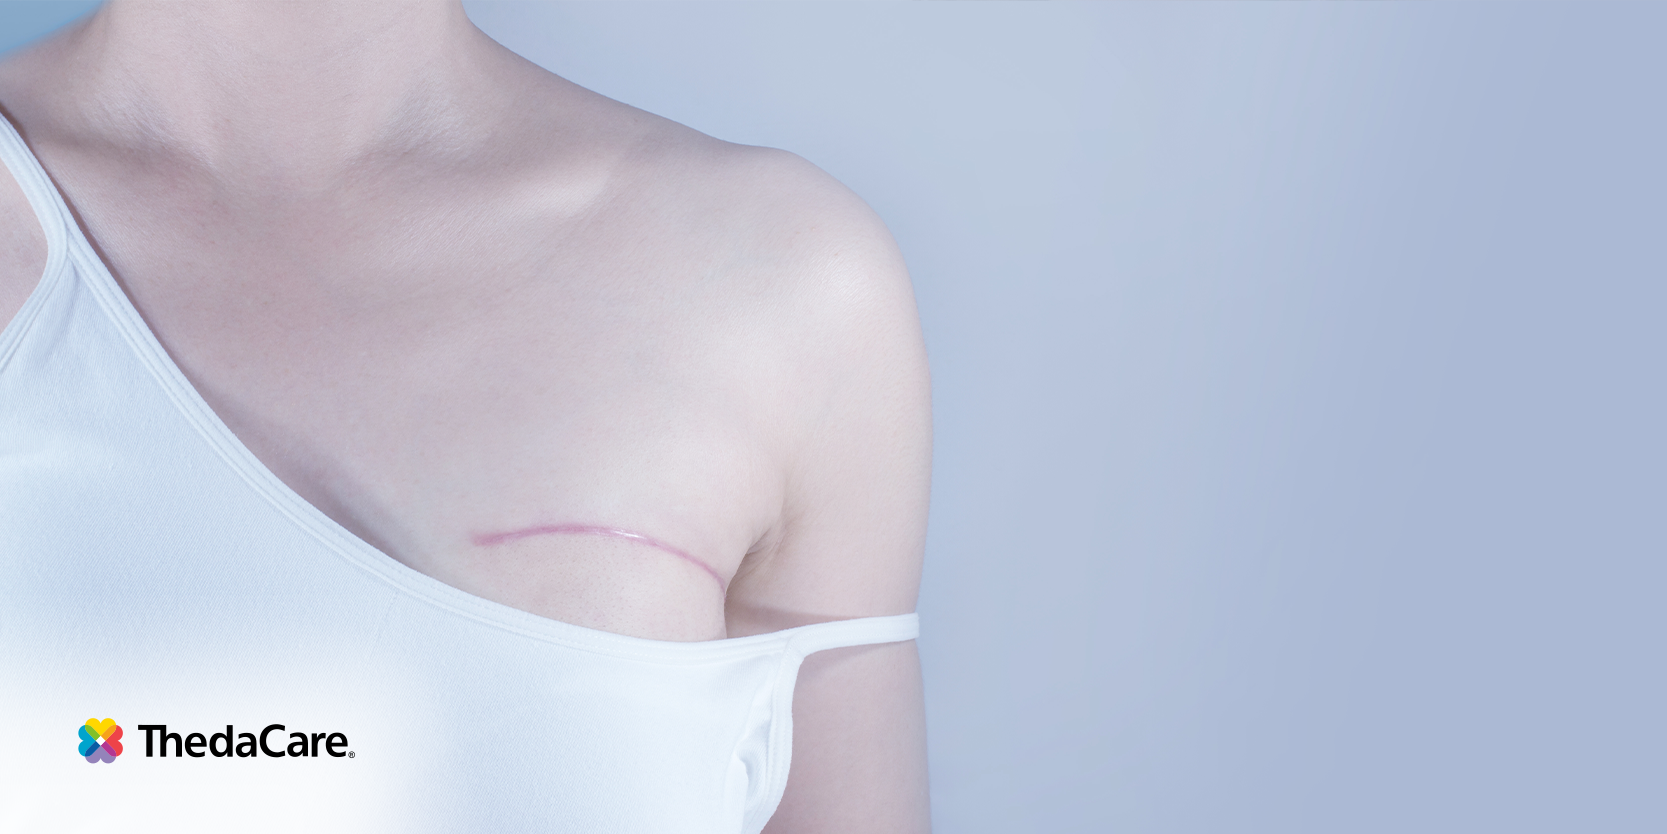 How to Support a Loved One During Their Mastectomy Journey